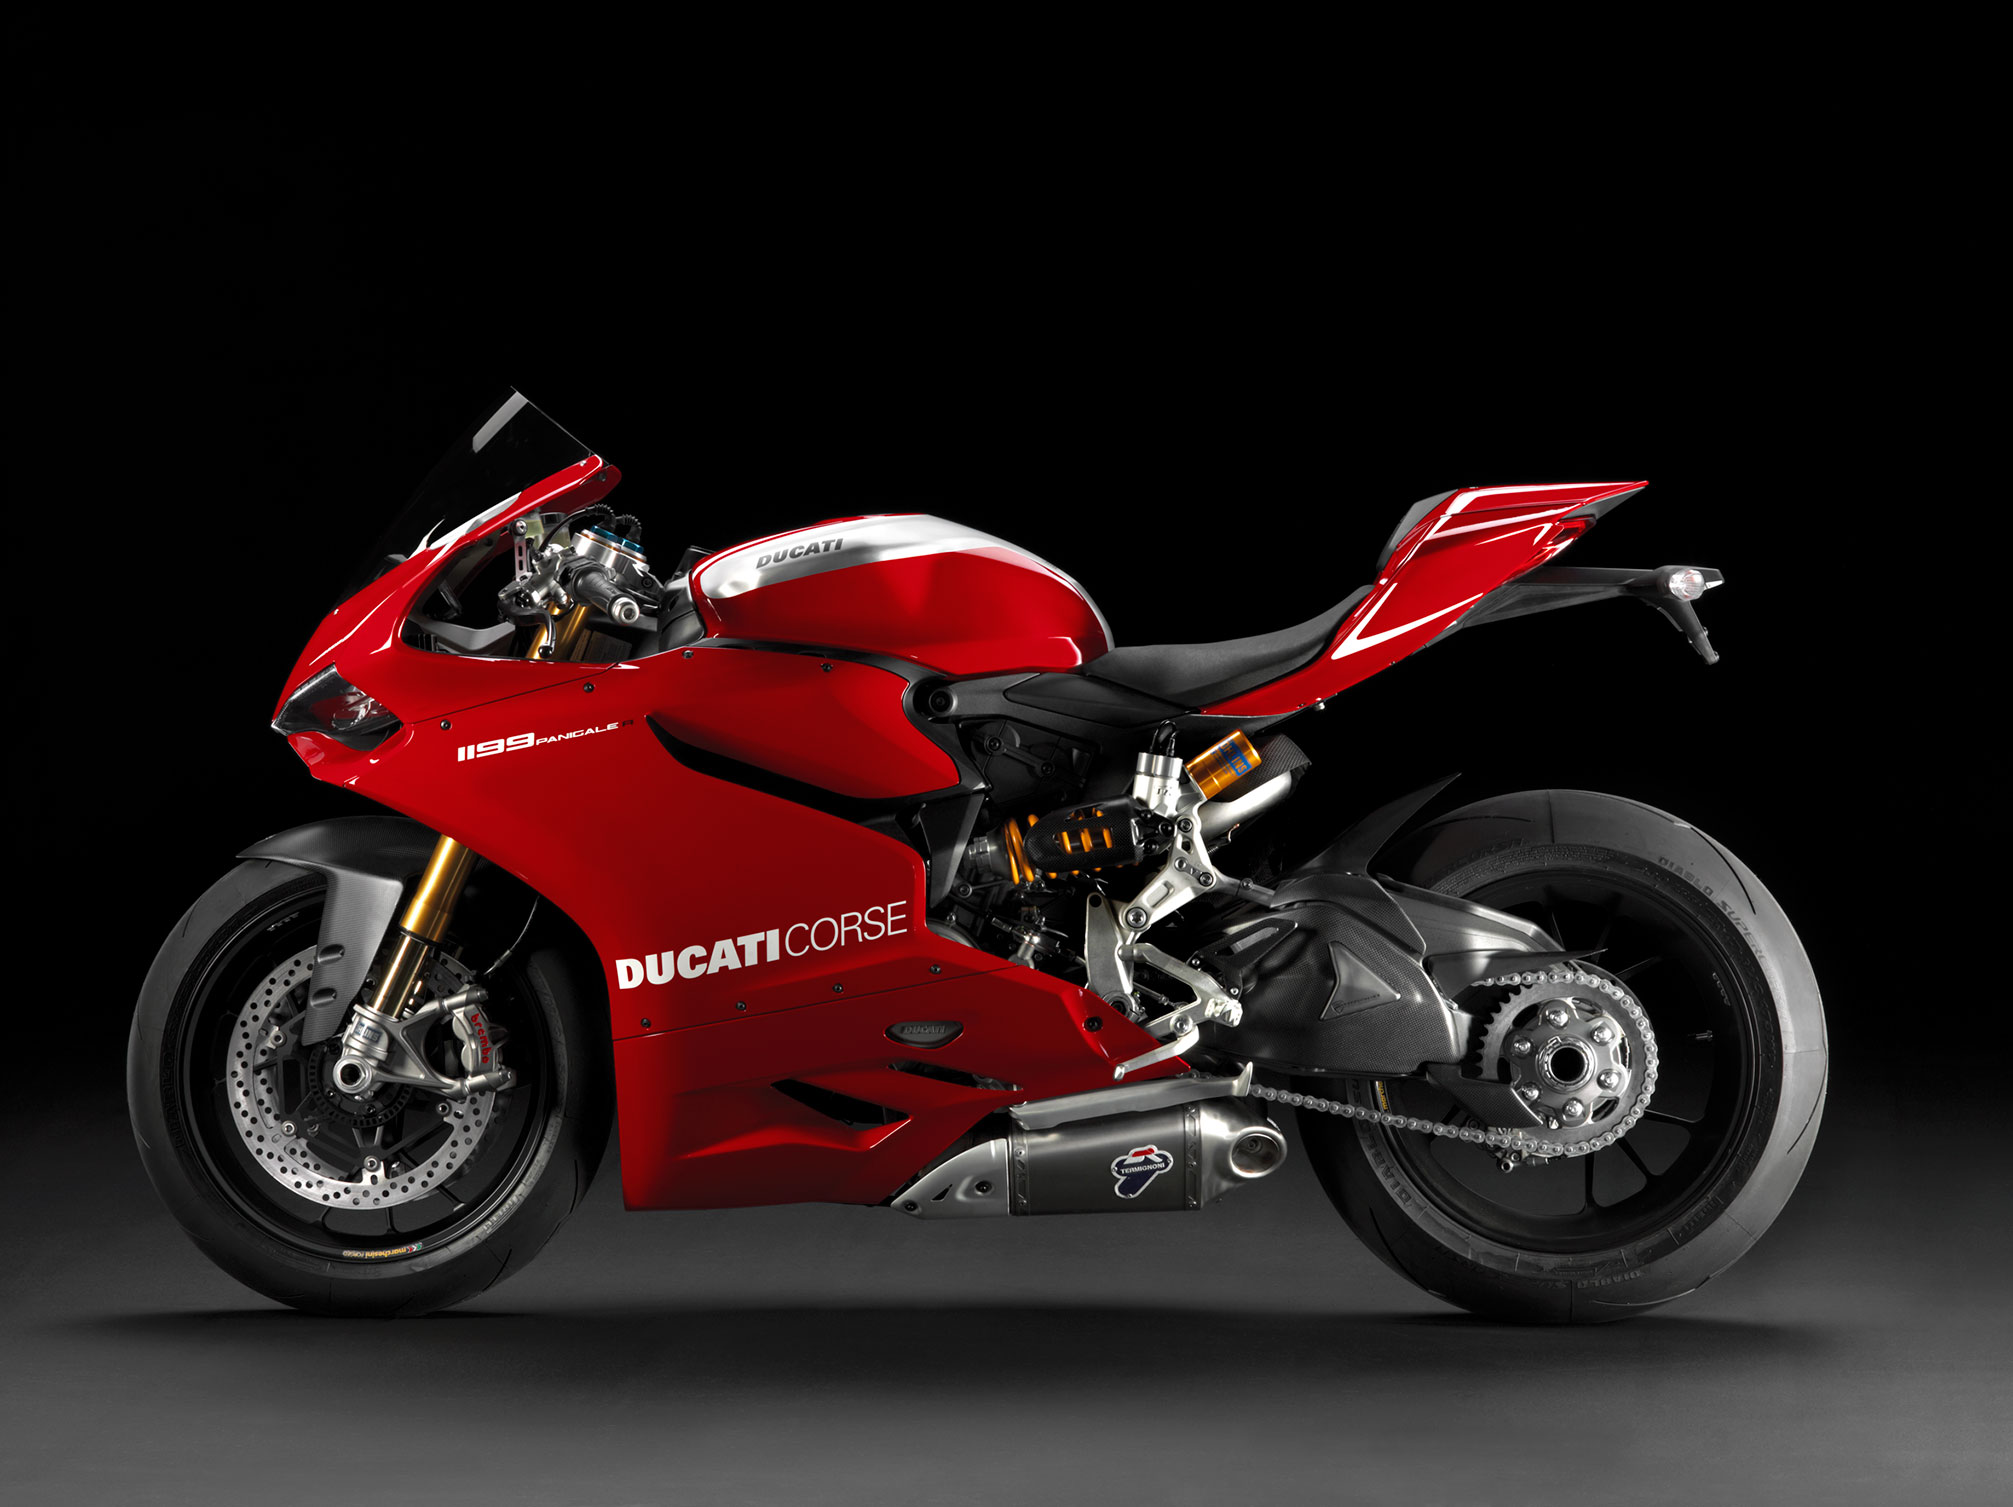 2013 Ducati Superbike 1199 Panigale R Review